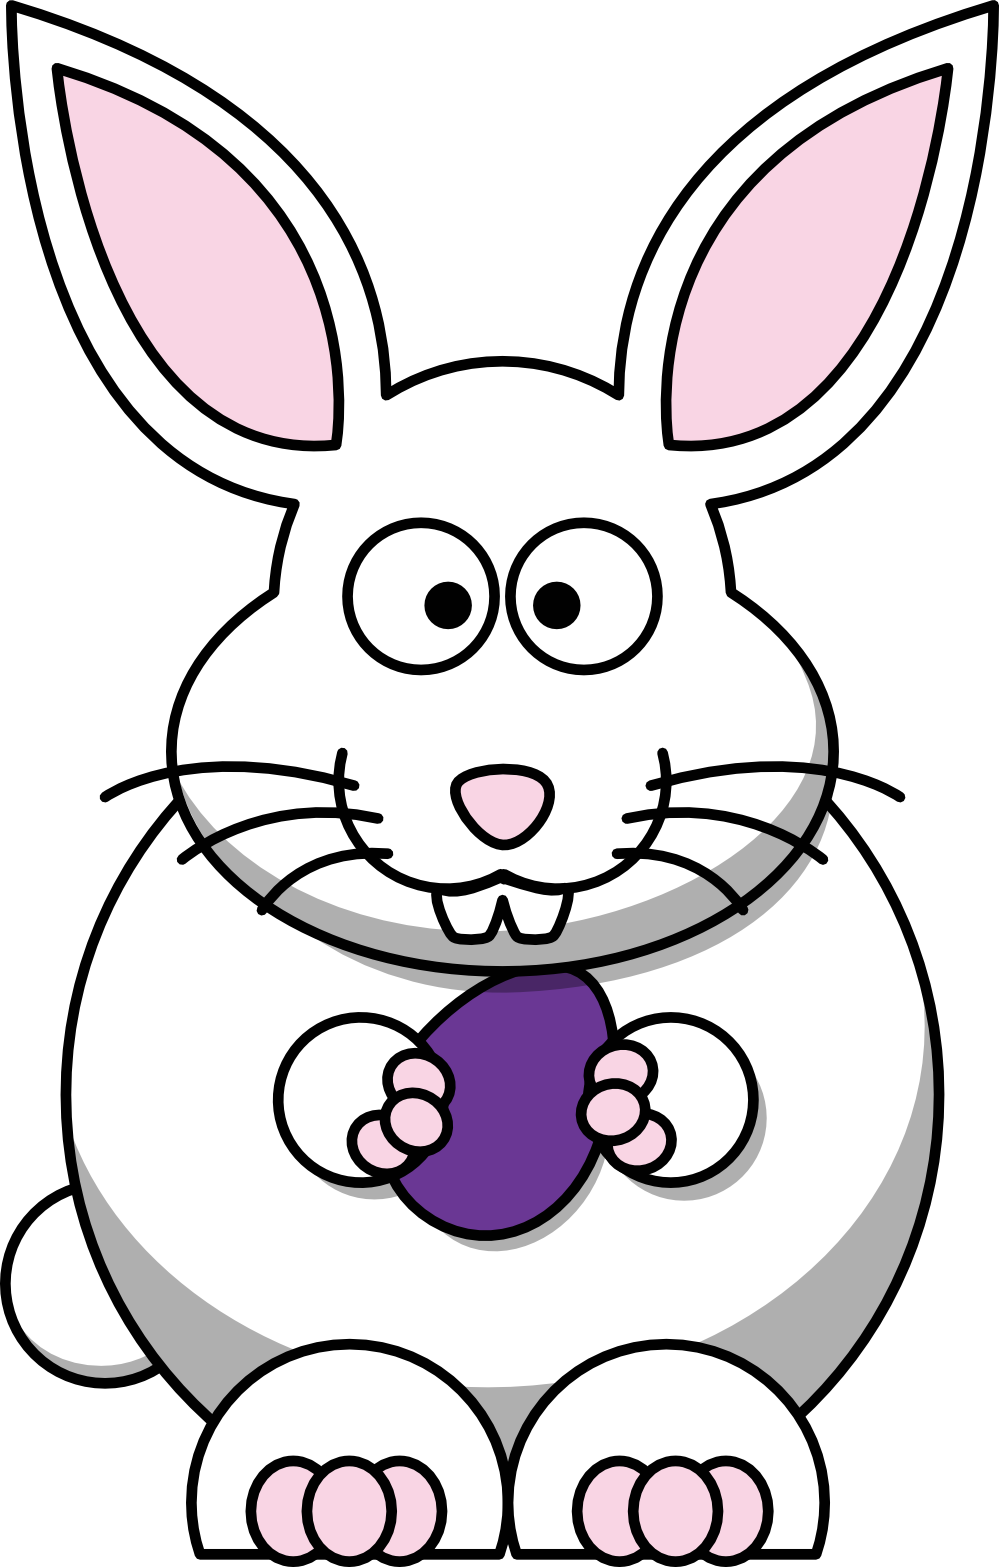 Rabbit Clipart For Kids   Clipart Panda   Free Clipart Images